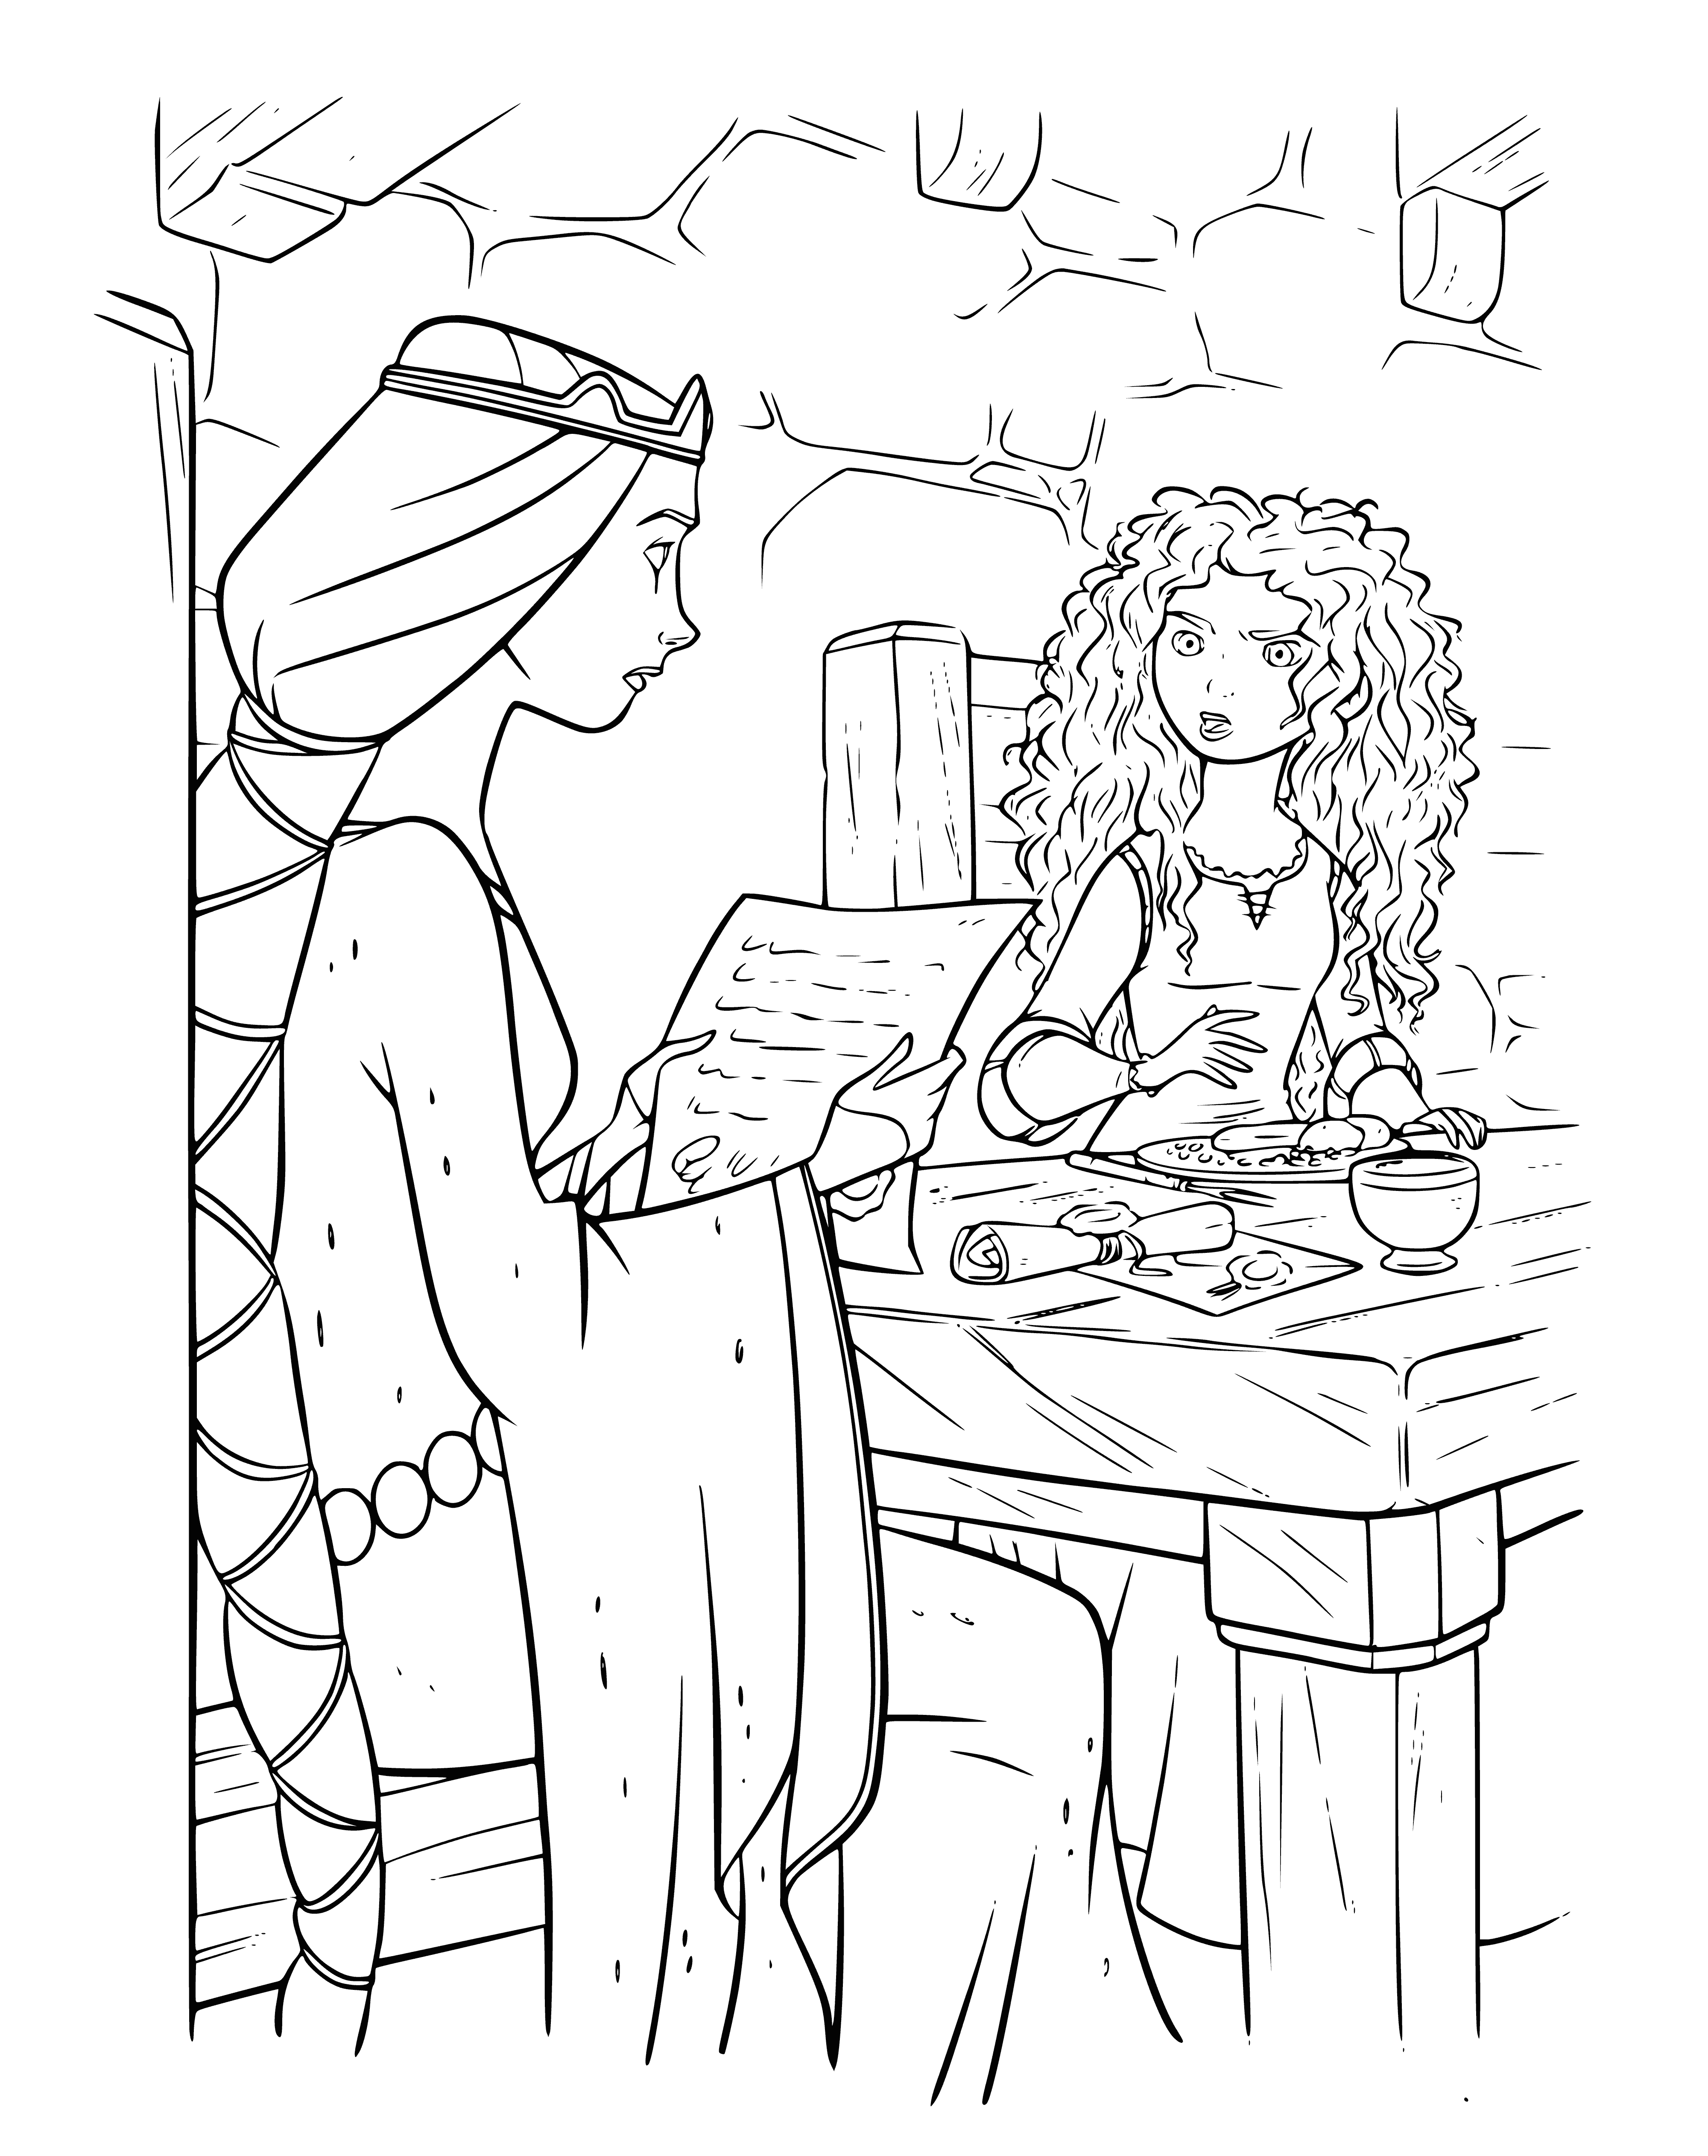 coloring page: Queen deep in thought, holding letter; Princess Merida awaiting news in front of fireplace burning logs.